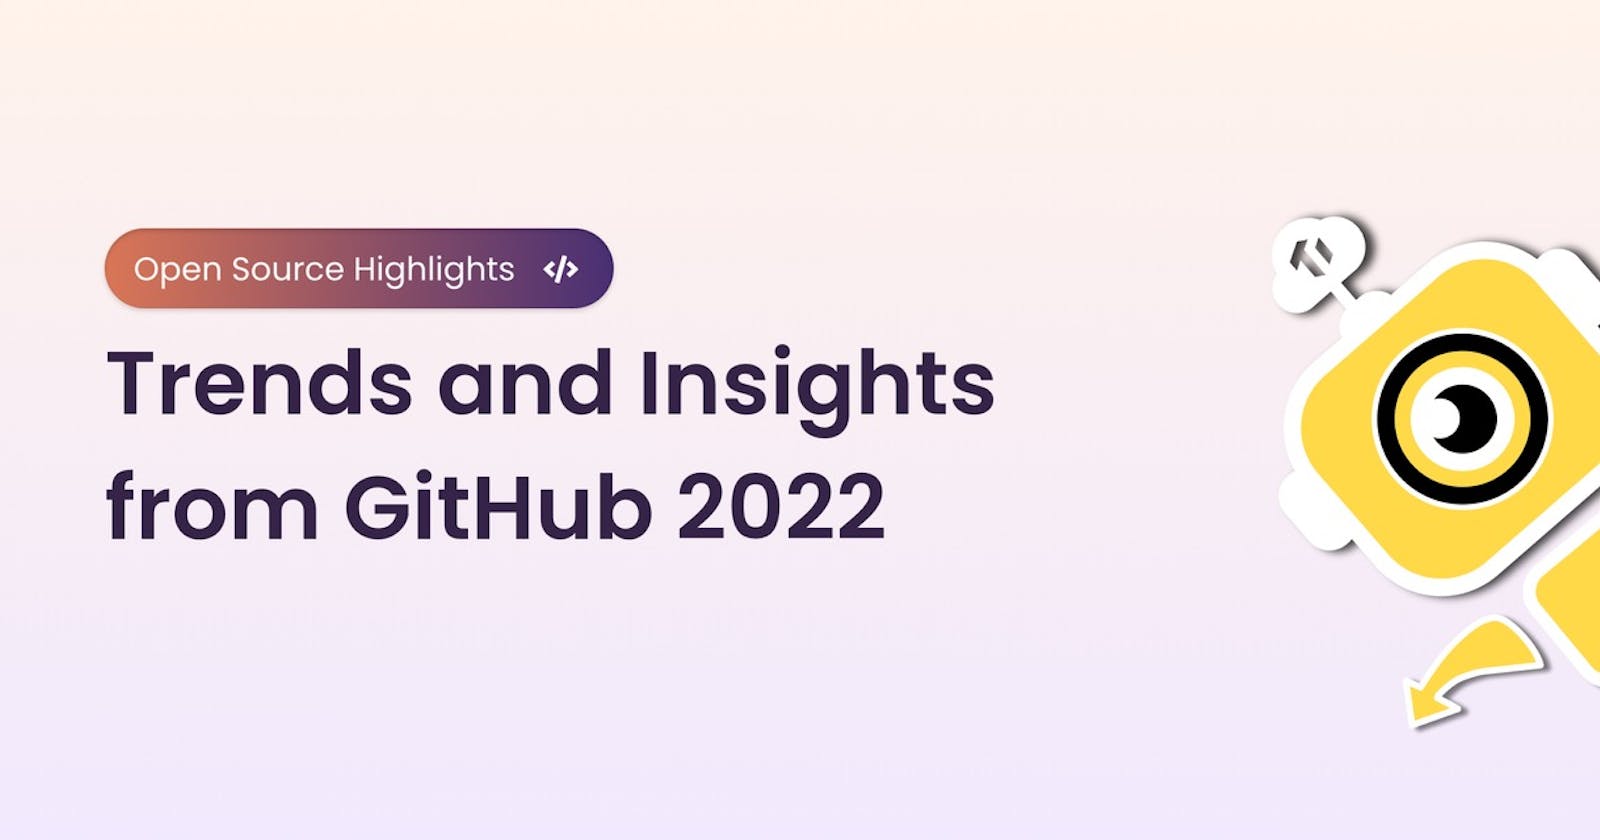 Open Source Highlights: Trends and Insights from GitHub 2022